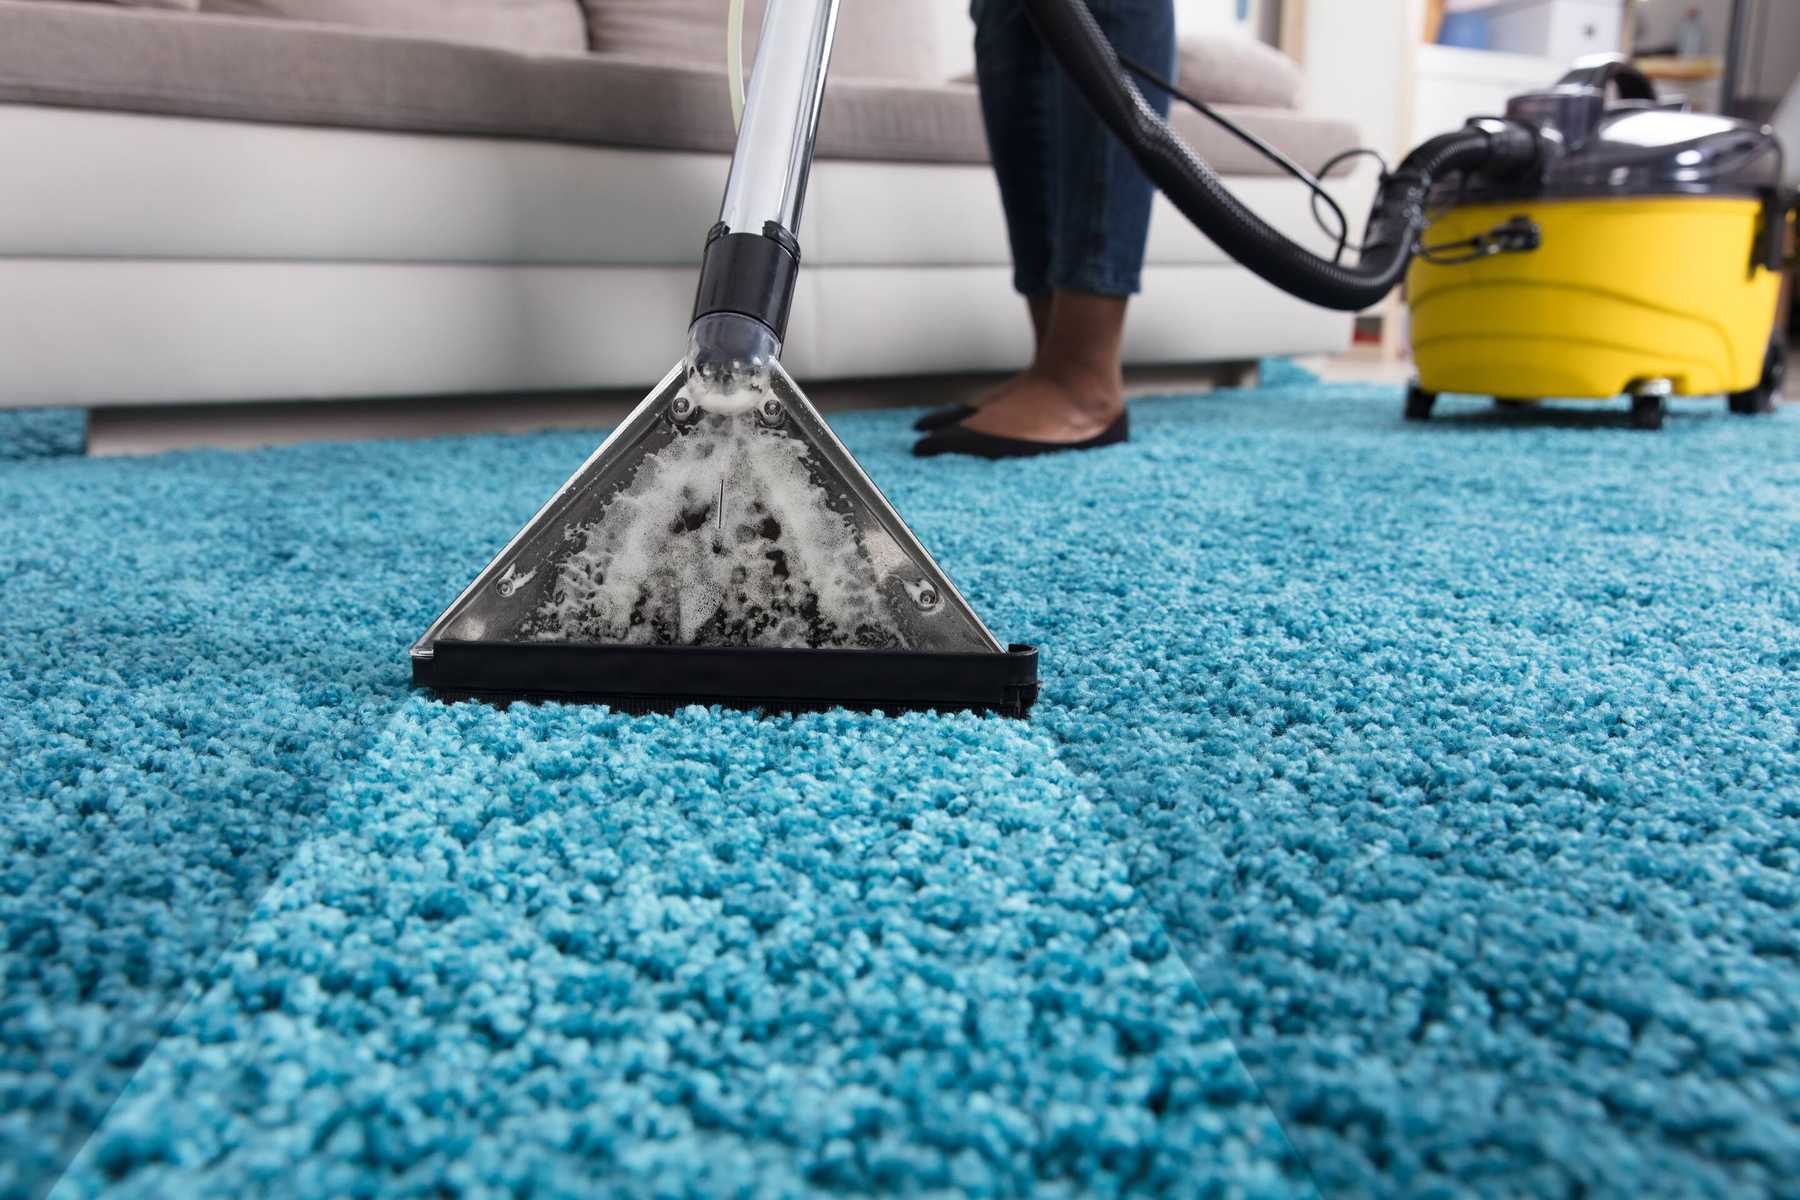 Image of a vacuum placed on a blue carpet